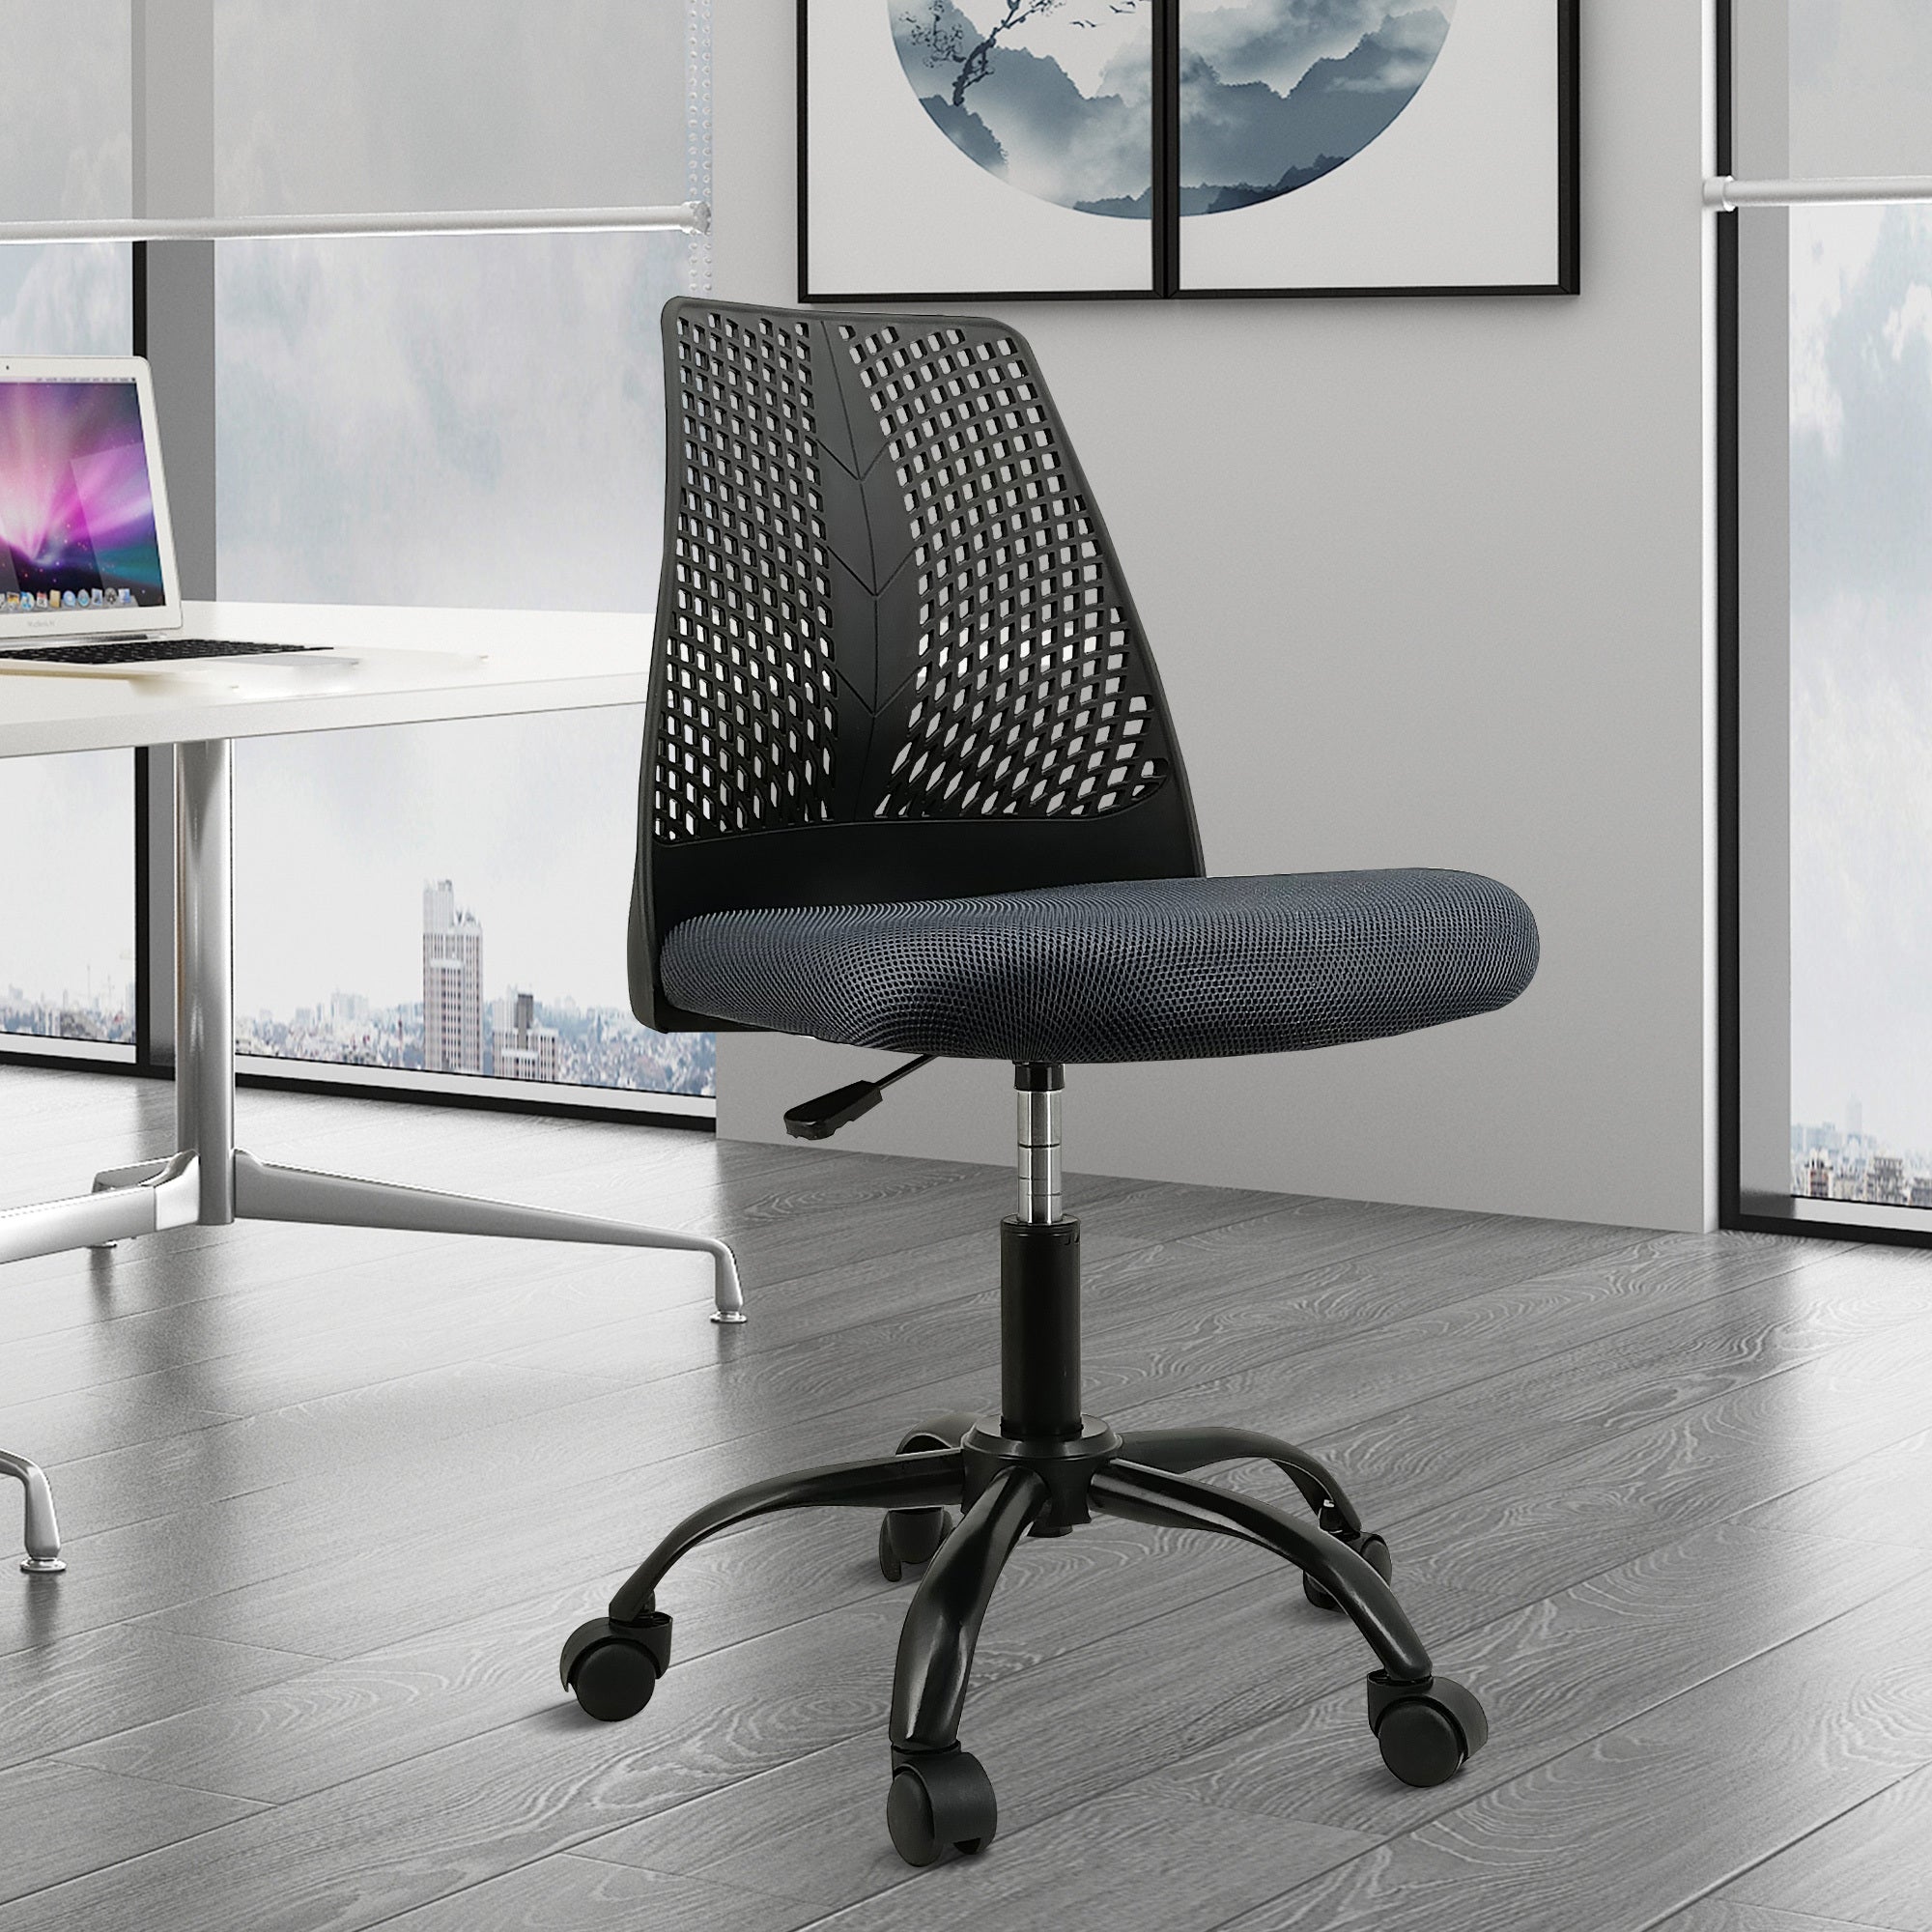 Ergonomic Office and Home Chair with Supportive black+grey-modern-foam-fabric